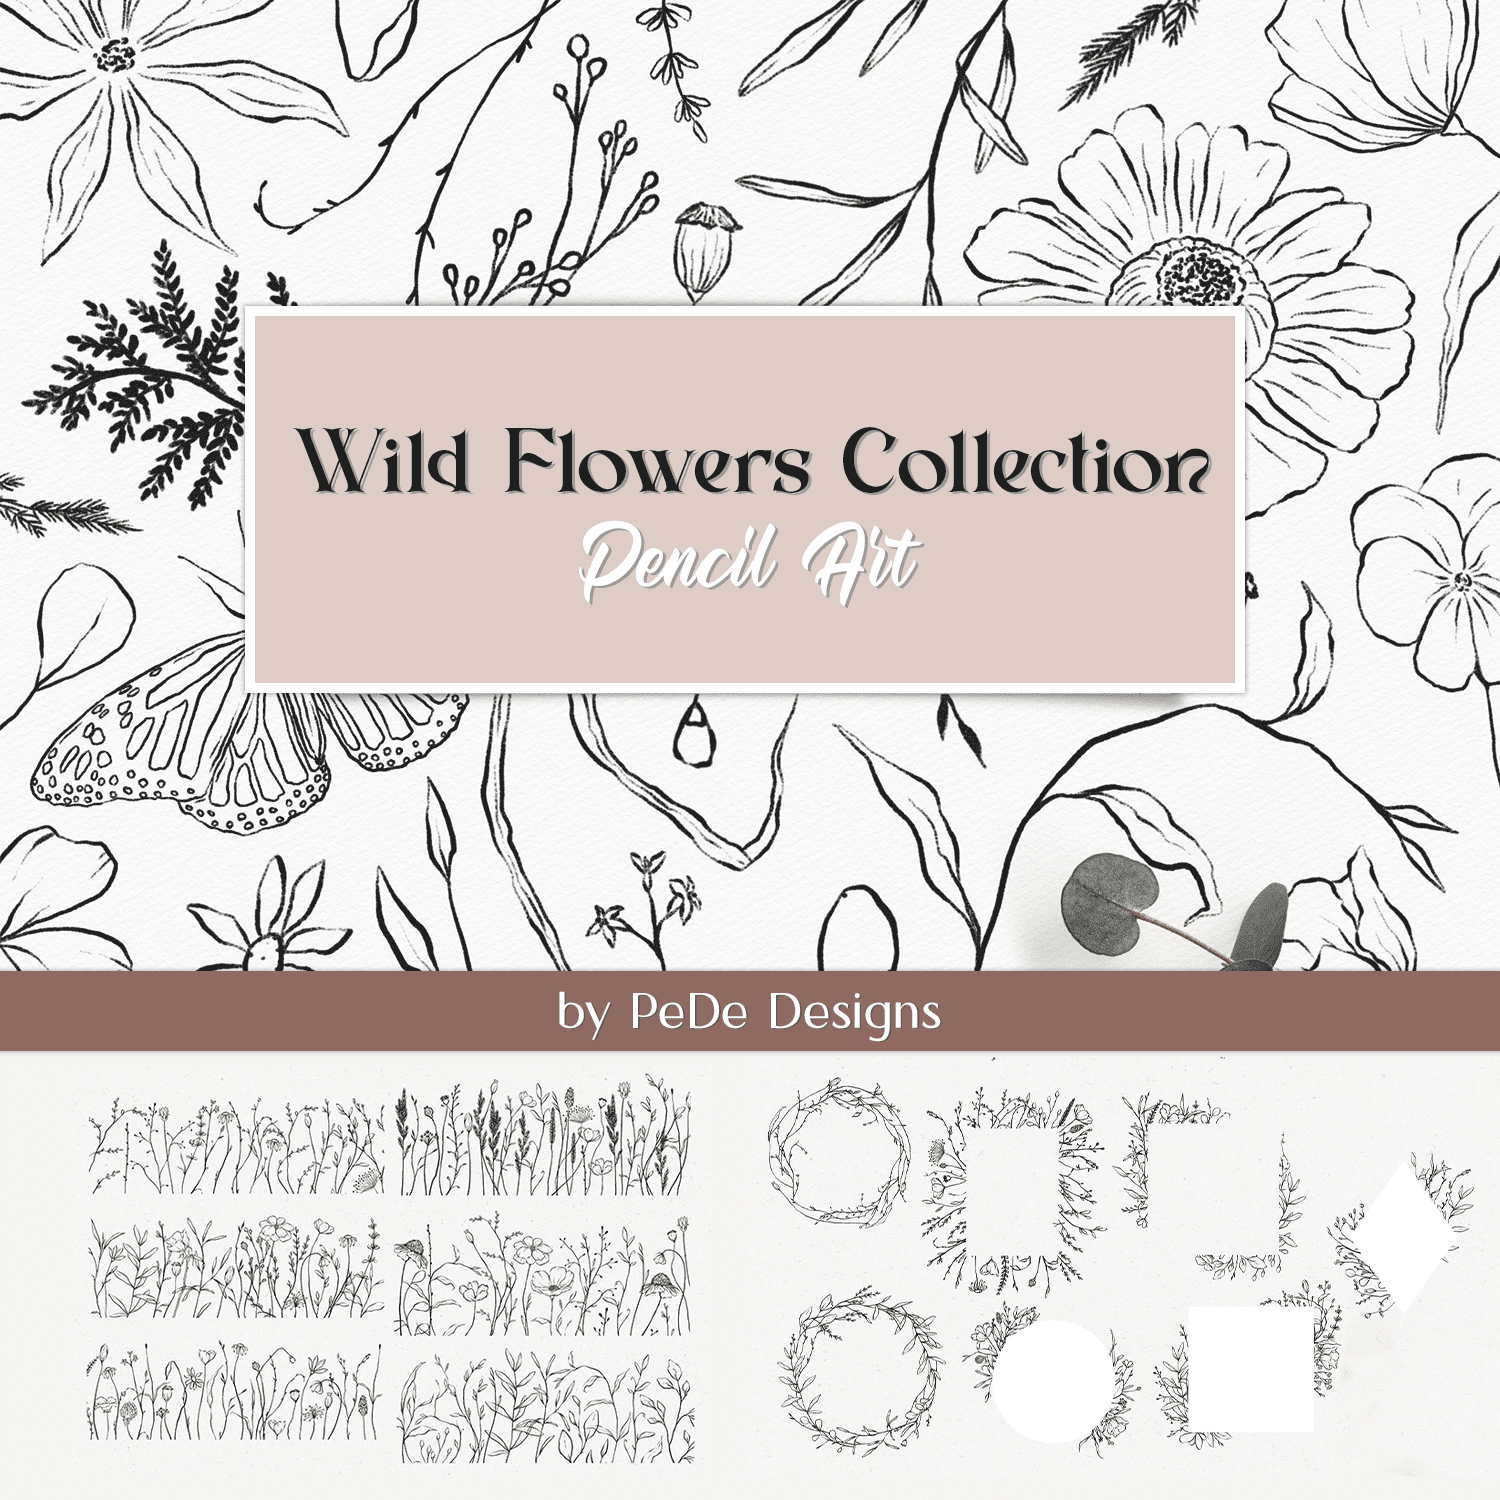 Wild Flowers Collection. Pencil Art.